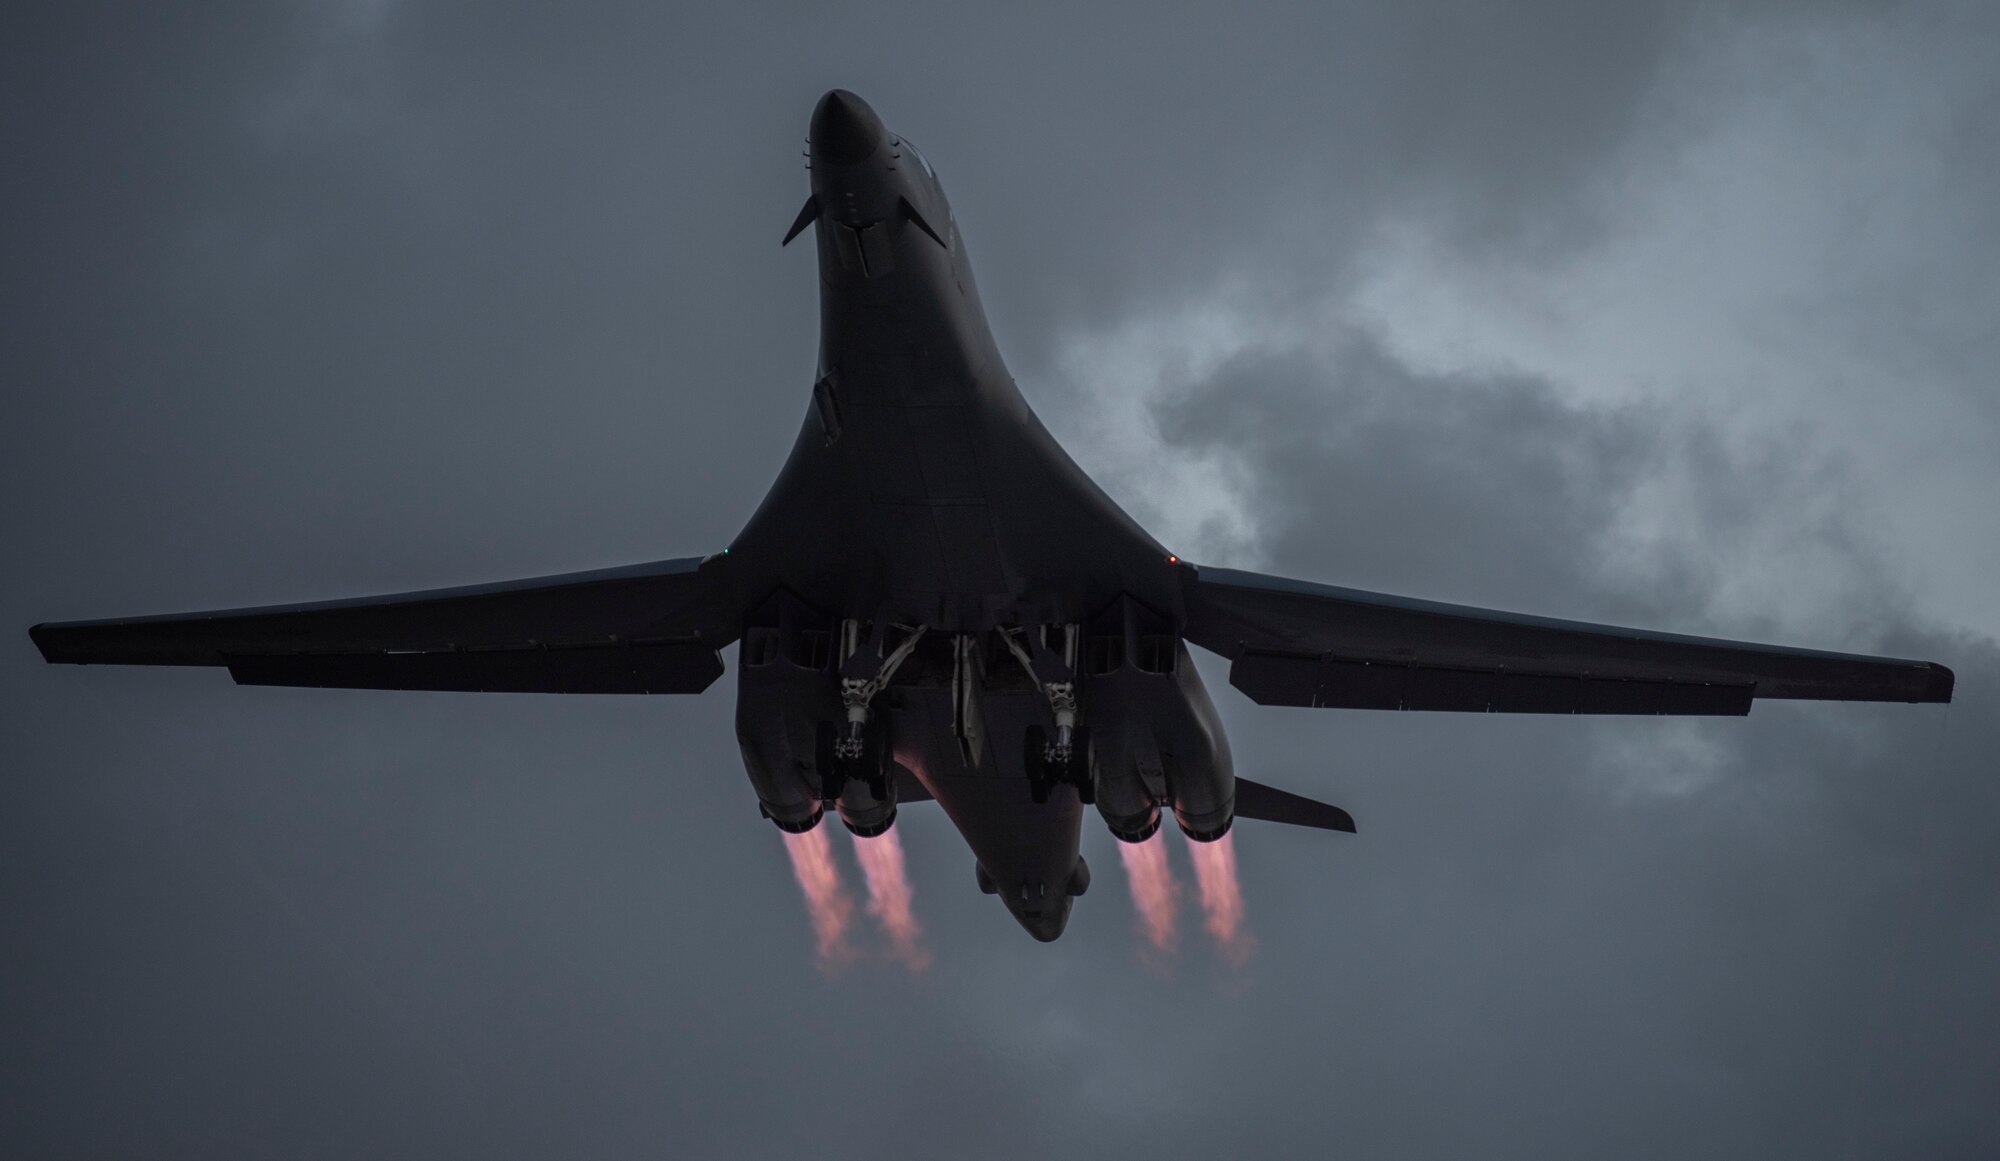 A 9th Expeditionary Bomb Squadron B-1B Lancer takes off from Andersen Air Force Base, Guam, May 21, 2020. In continued demonstration of the U.S. Air Force’s dynamic force employment model, two U.S. Air Force B-1B Lancers flew from Andersen AFB and conducted training in Alaska and near Misawa Air Base, Japan.

The 9th EBS, and other units assigned to the 7th Bomb Wing of Dyess Air Force Base, Texas, are deployed to Guam as part of a Bomber Task Force. BTFs contribute to joint force lethality, assure allies and partners, and deter aggression in the Indo-Pacific. (U.S. Air Force photo by Senior Airman River Bruce)